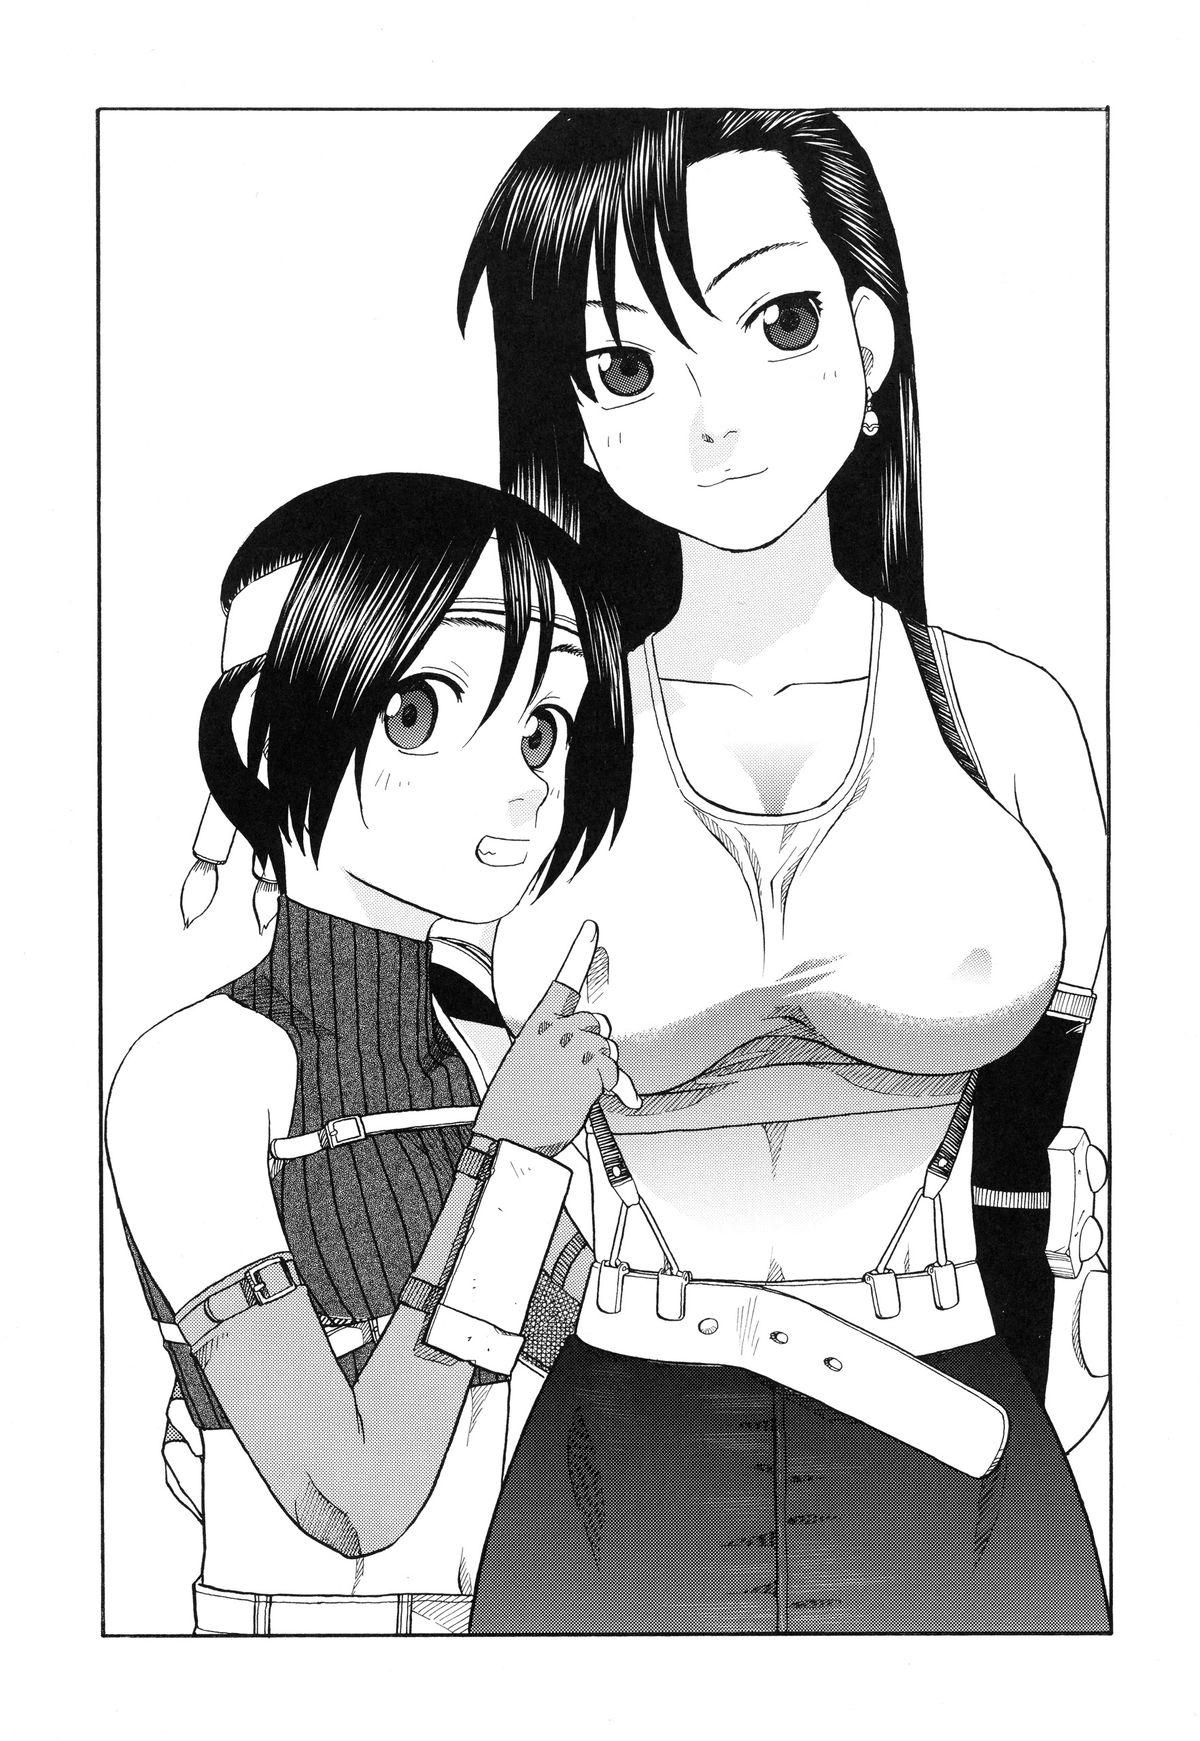 Family Porn Tifa to Yuffie to Yojouhan - Final fantasy vii Teasing - Page 3